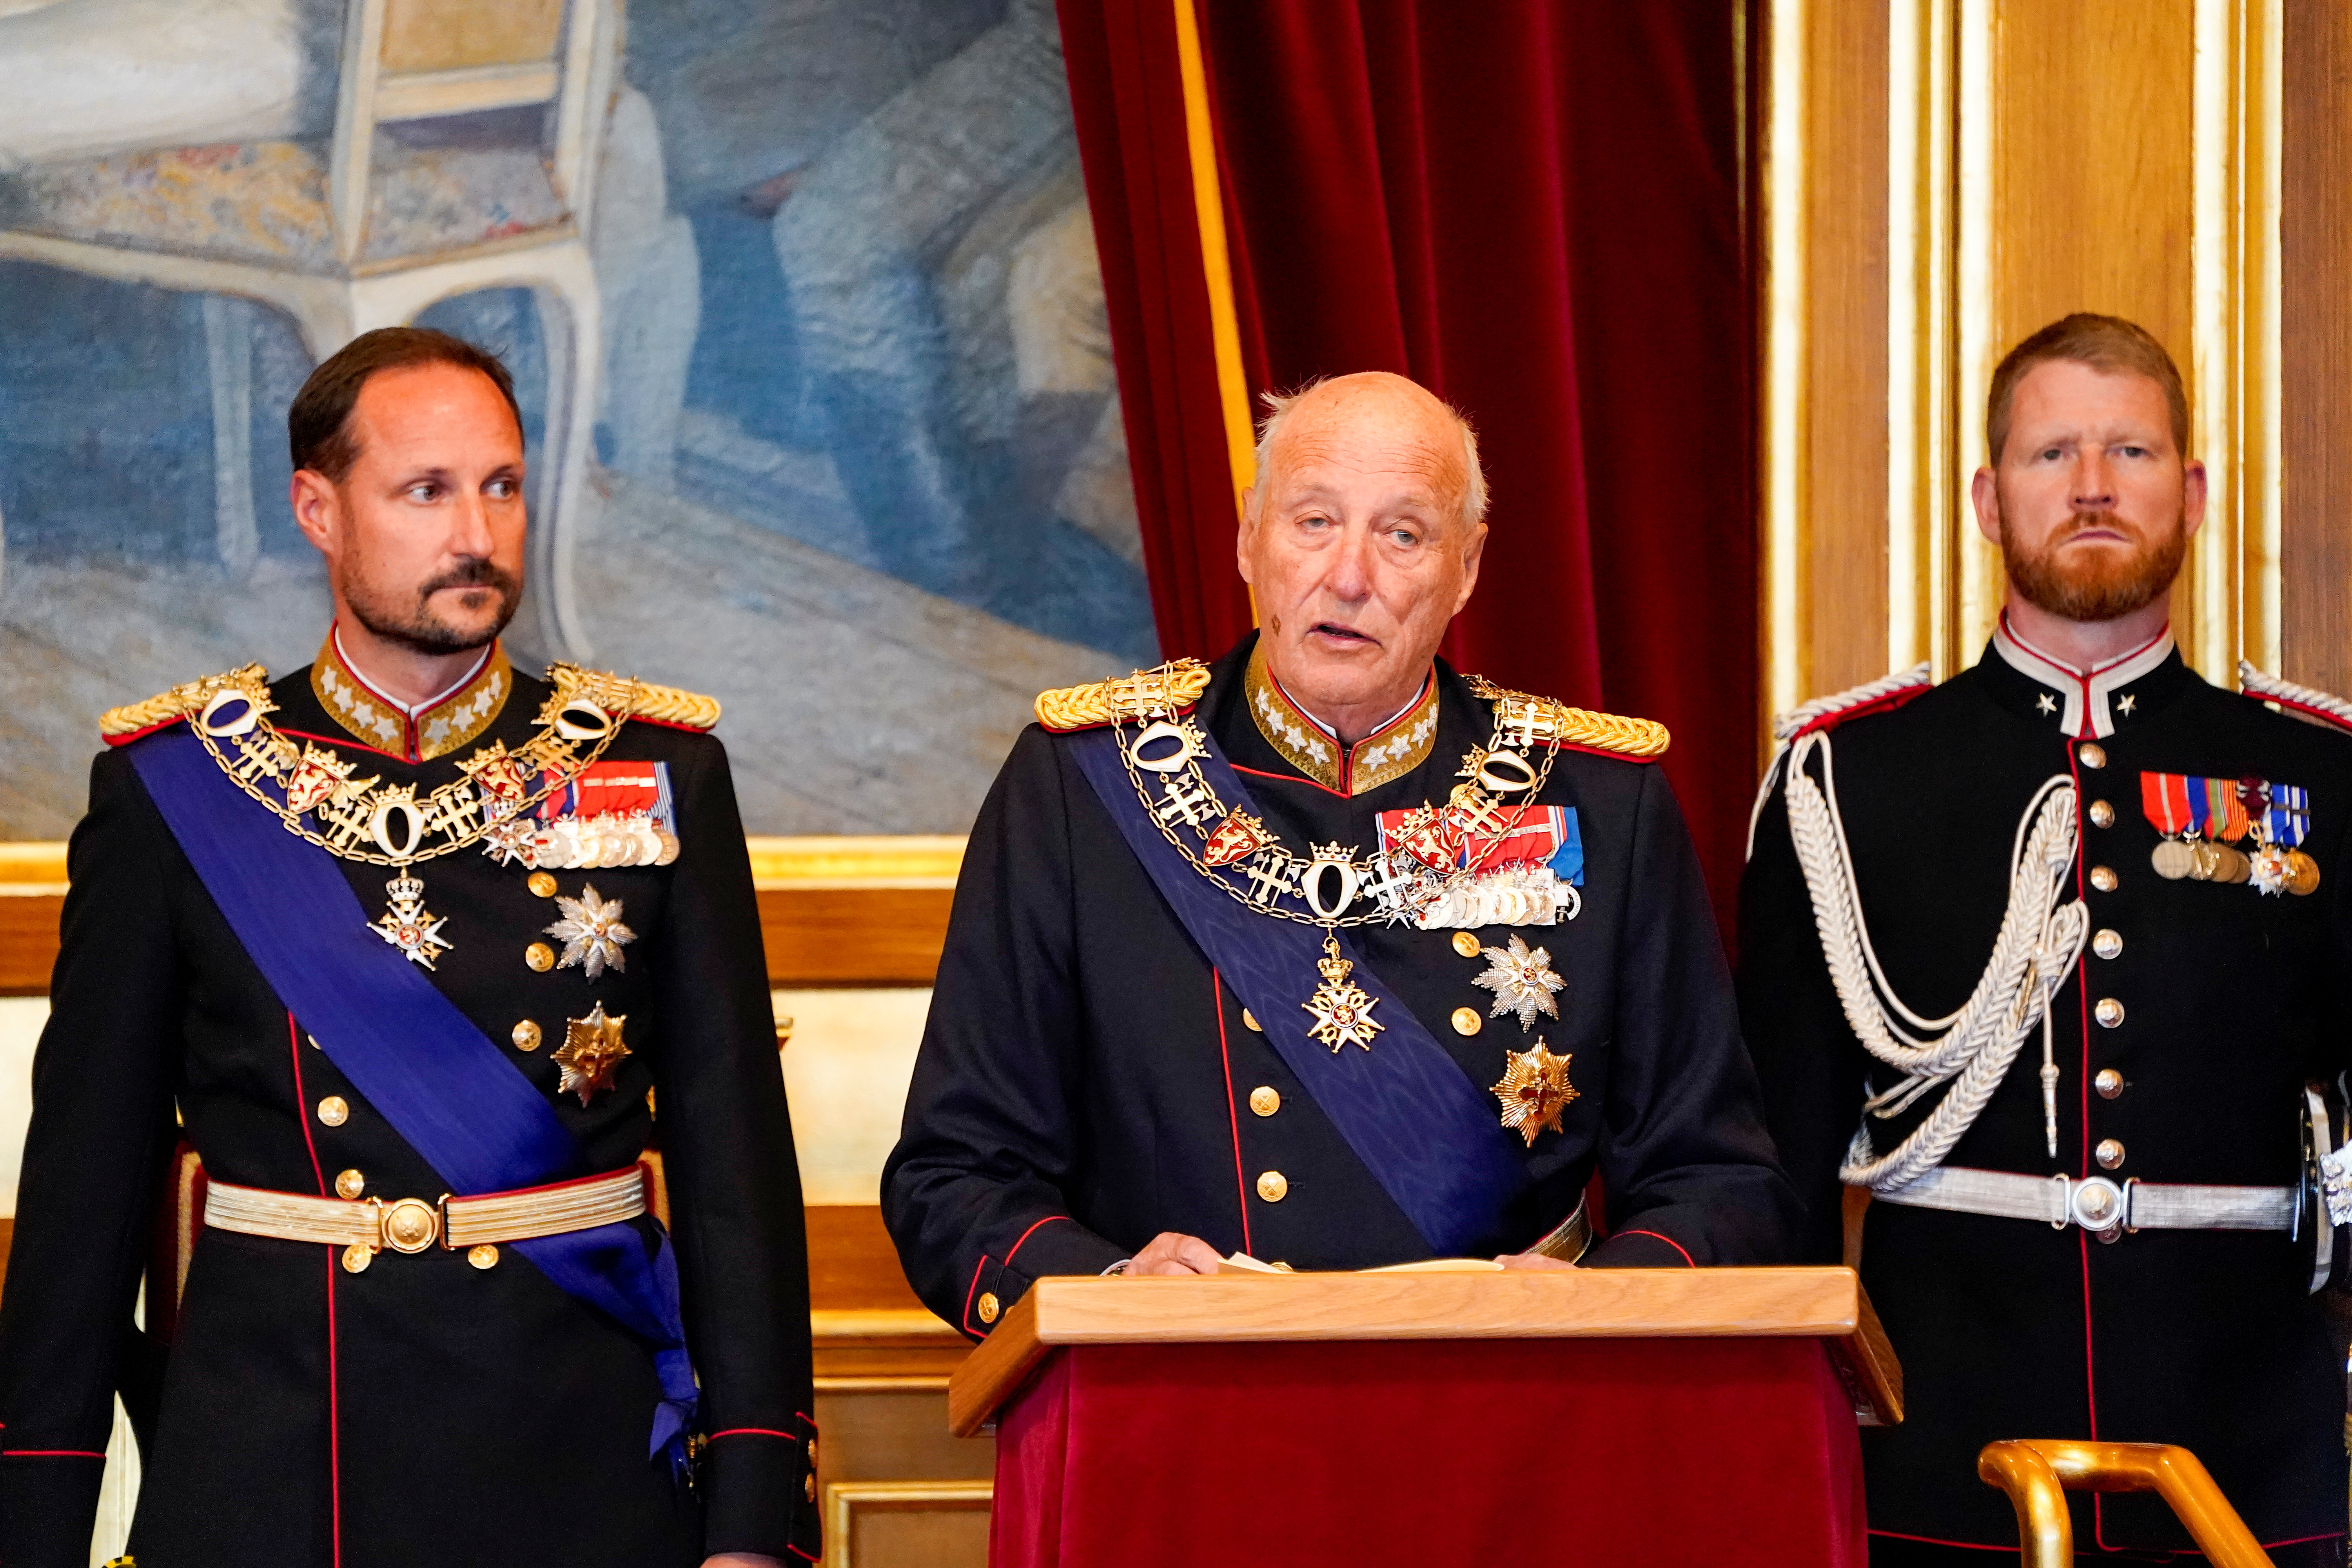 King Harald of Norway tests positive for COVID-19